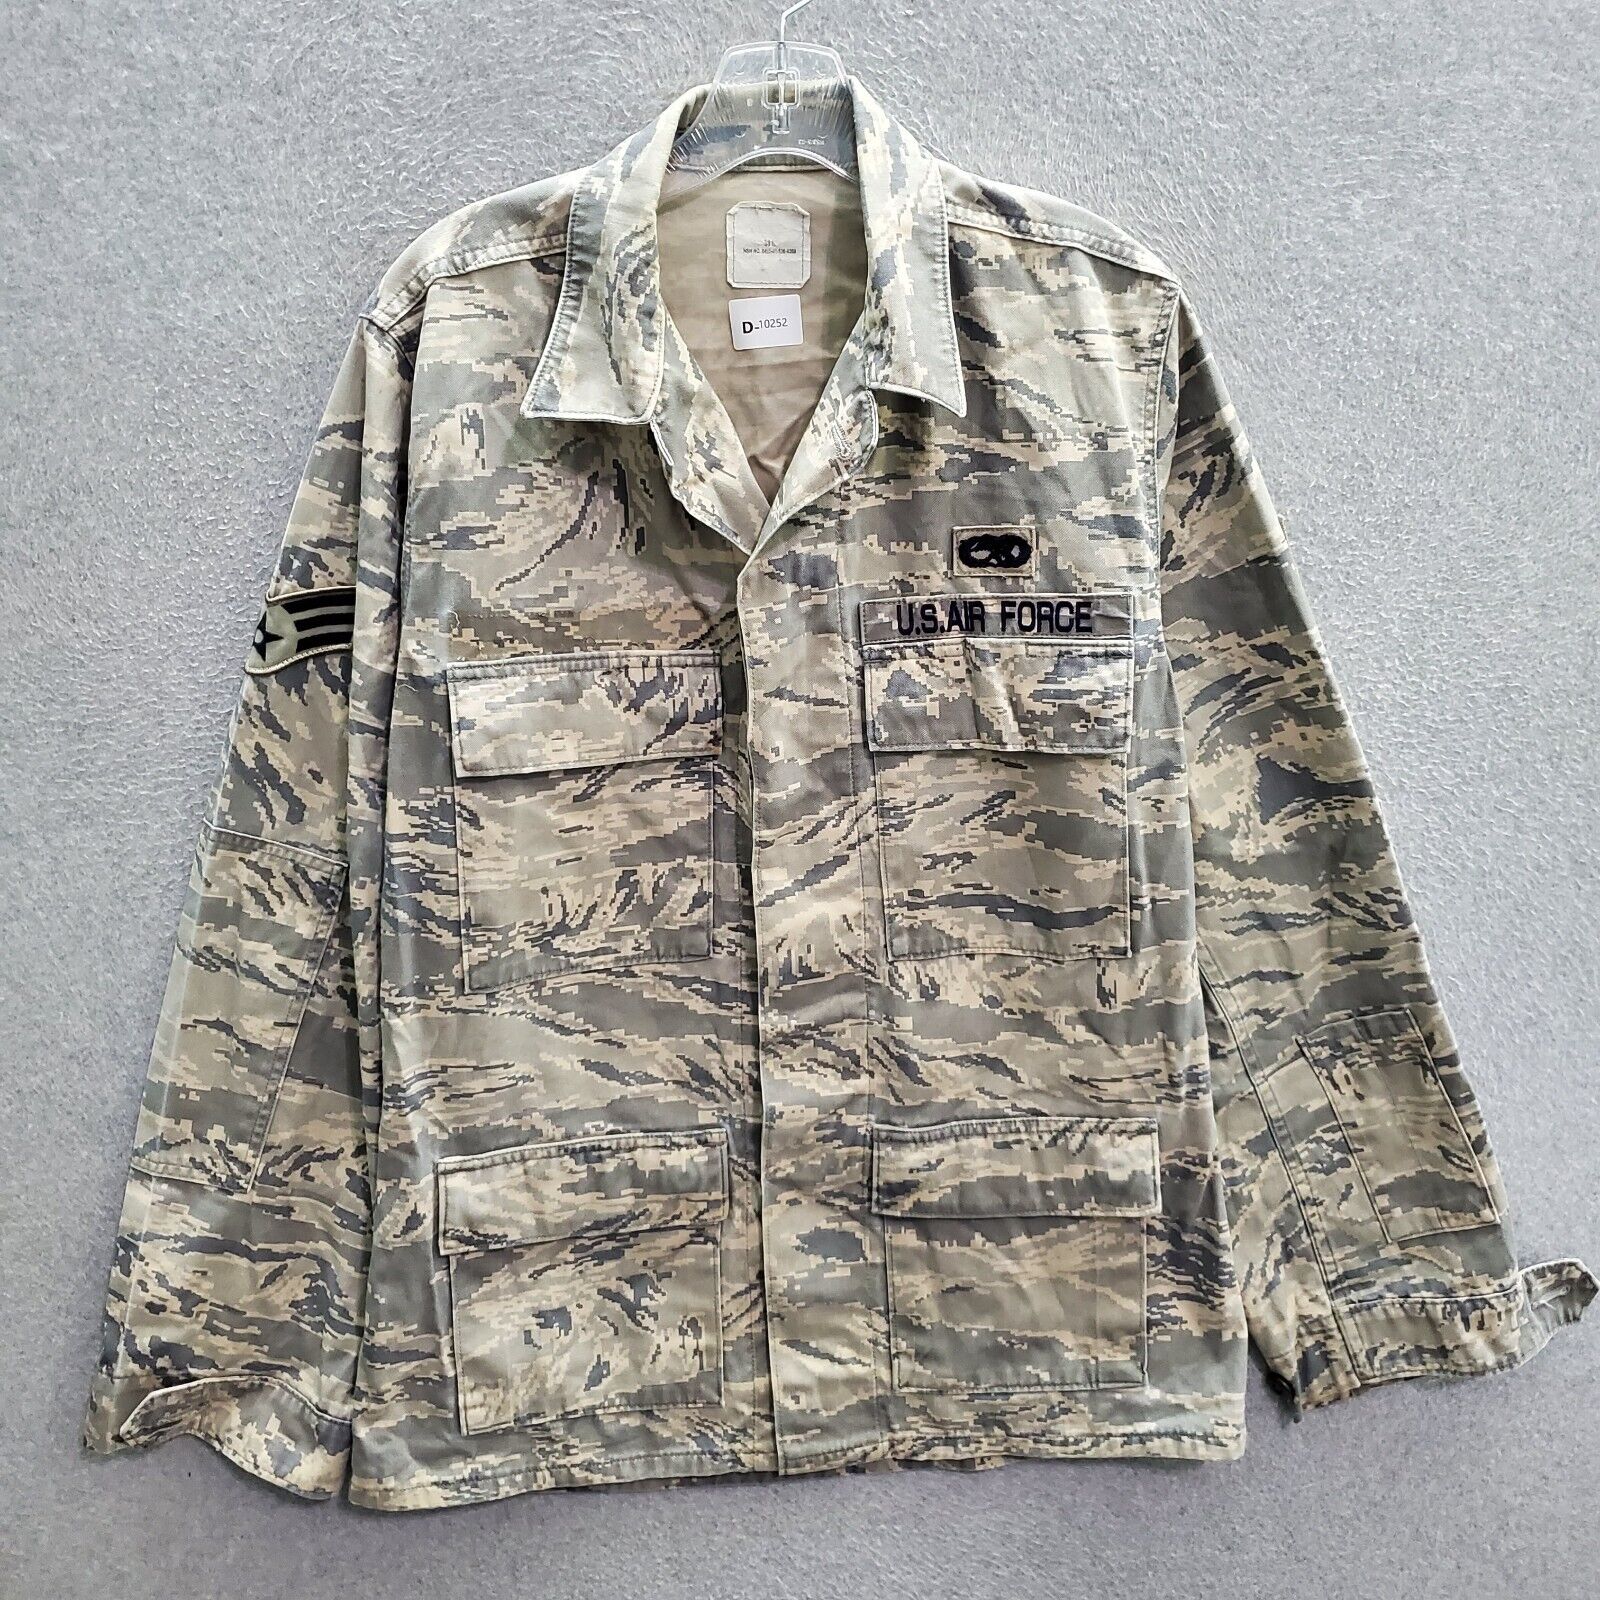 US Air Force Men Jacket Small Beige Camo Utility Logo Coat Ripstop Twill